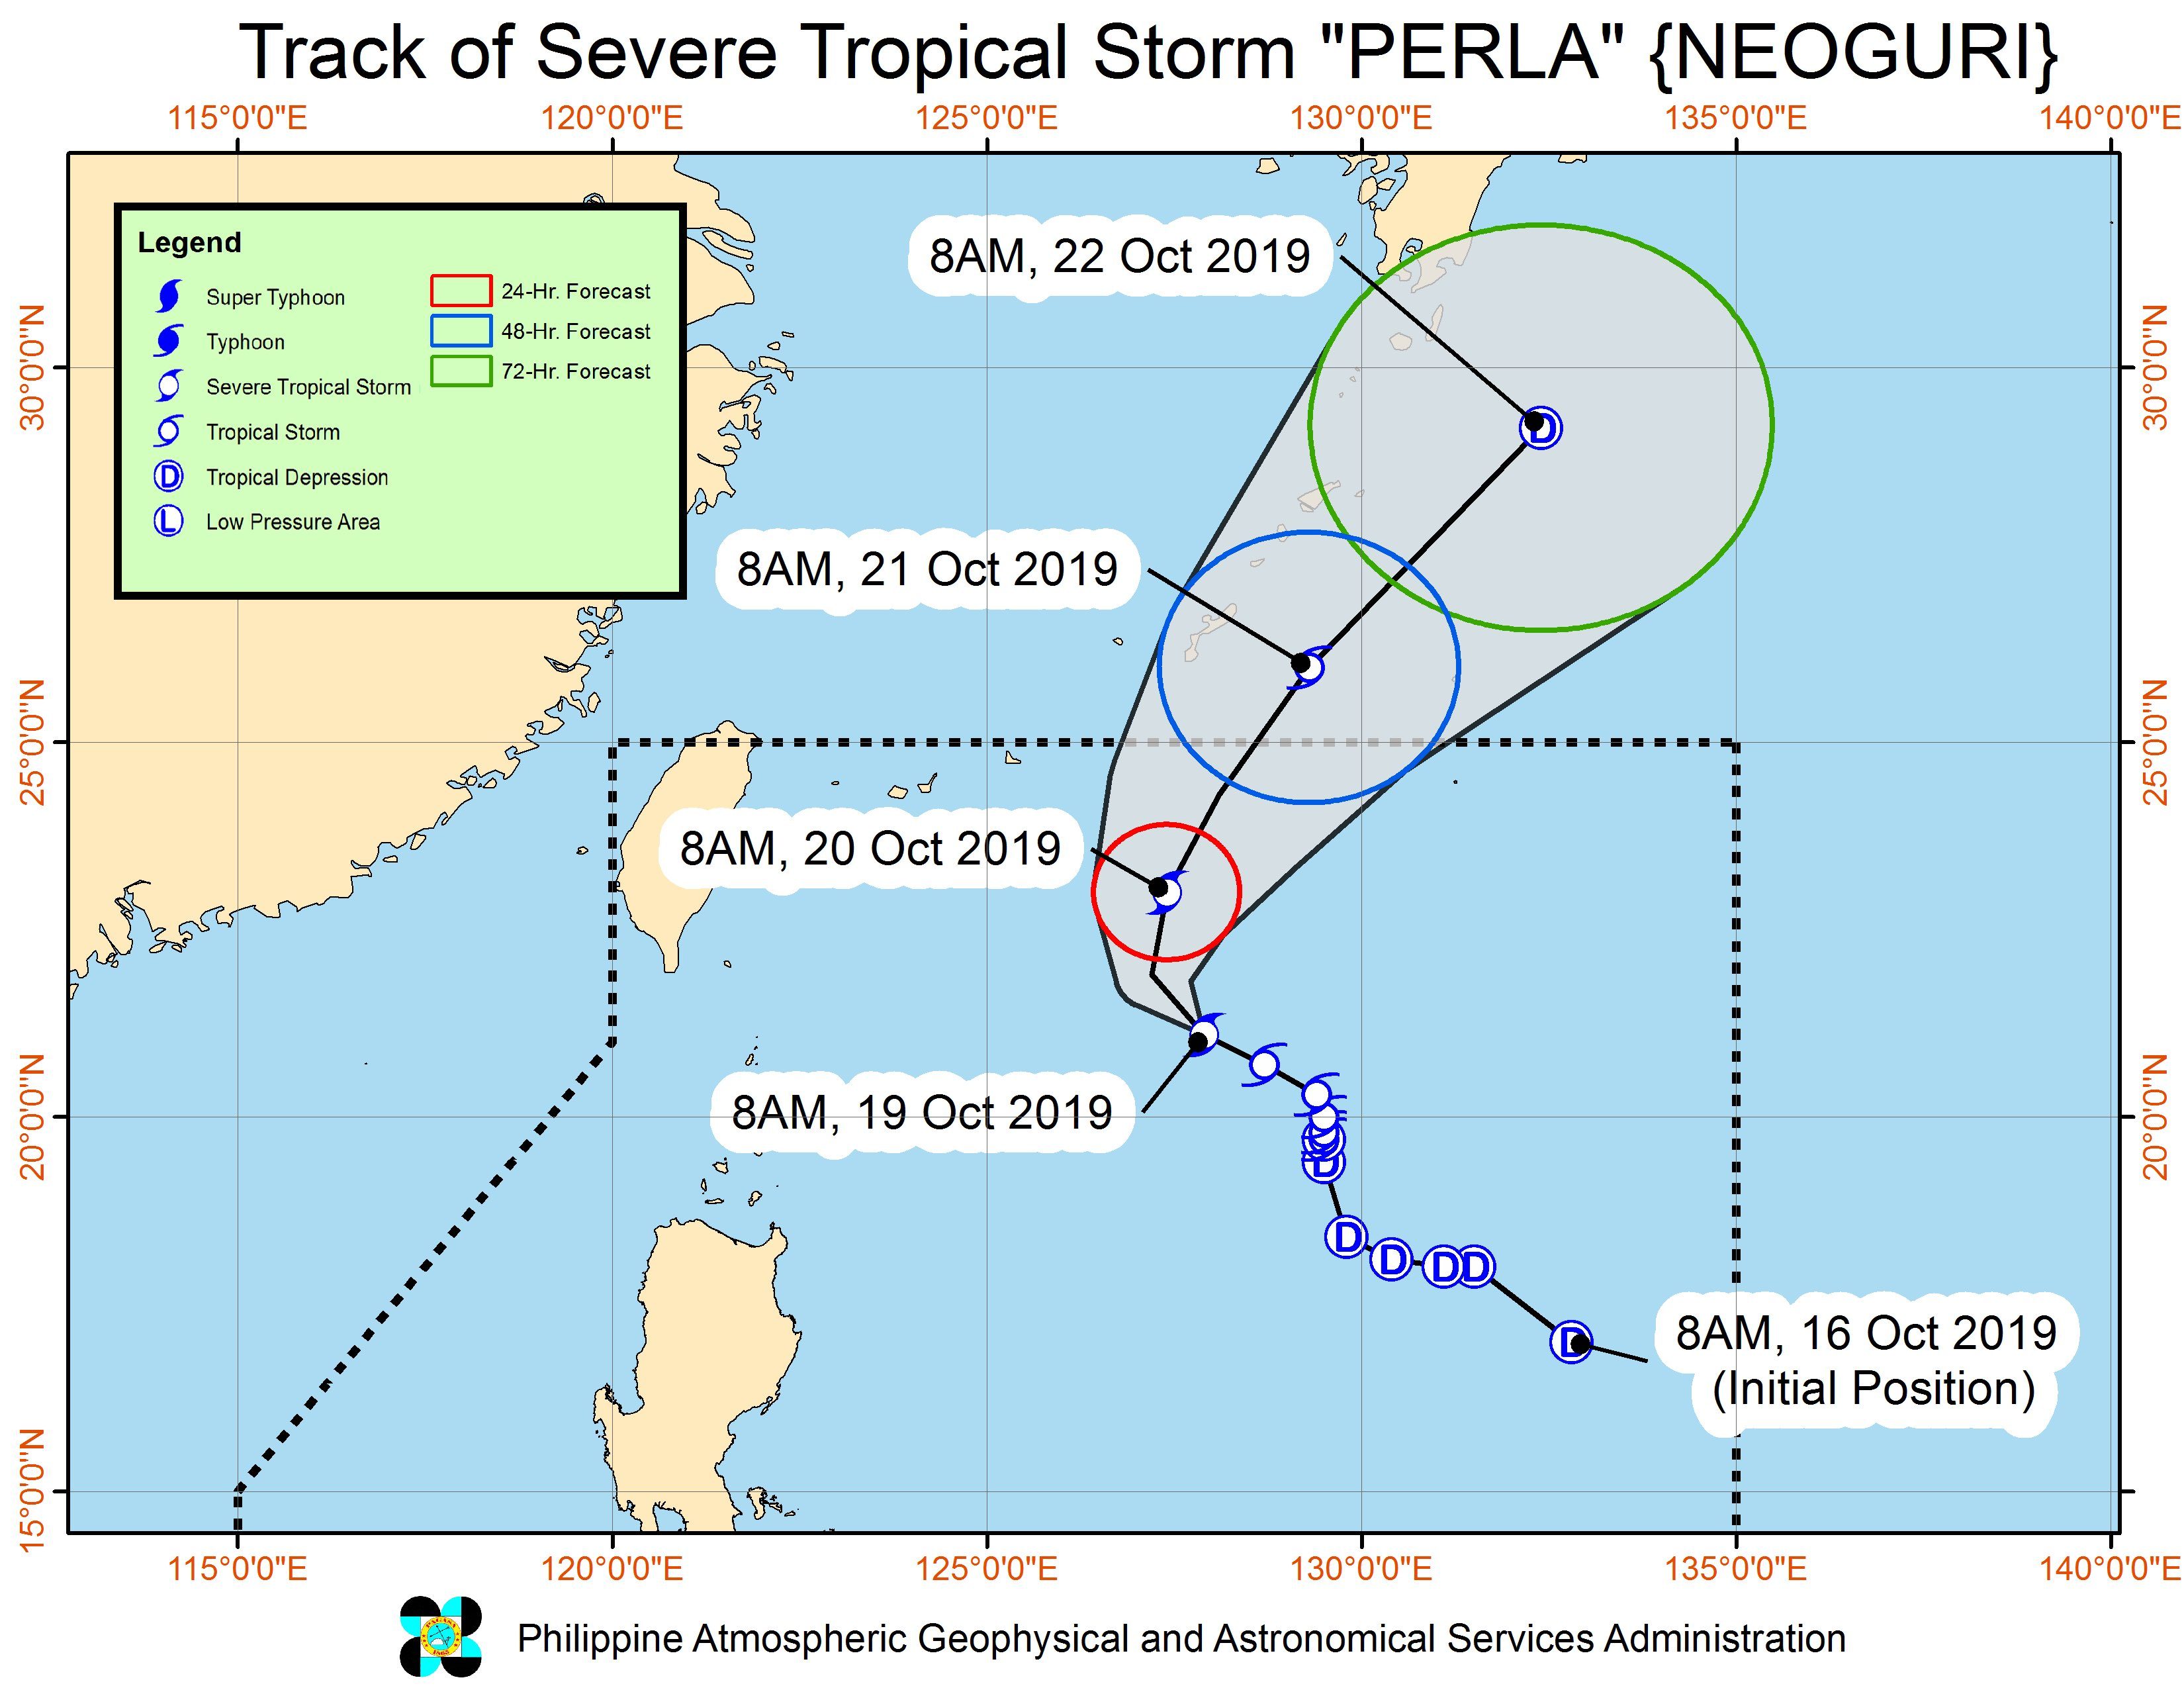 Forecast track of Severe Tropical Storm Perla (Neoguri) as of October 19, 2019, 11 am. Image from PAGASA 